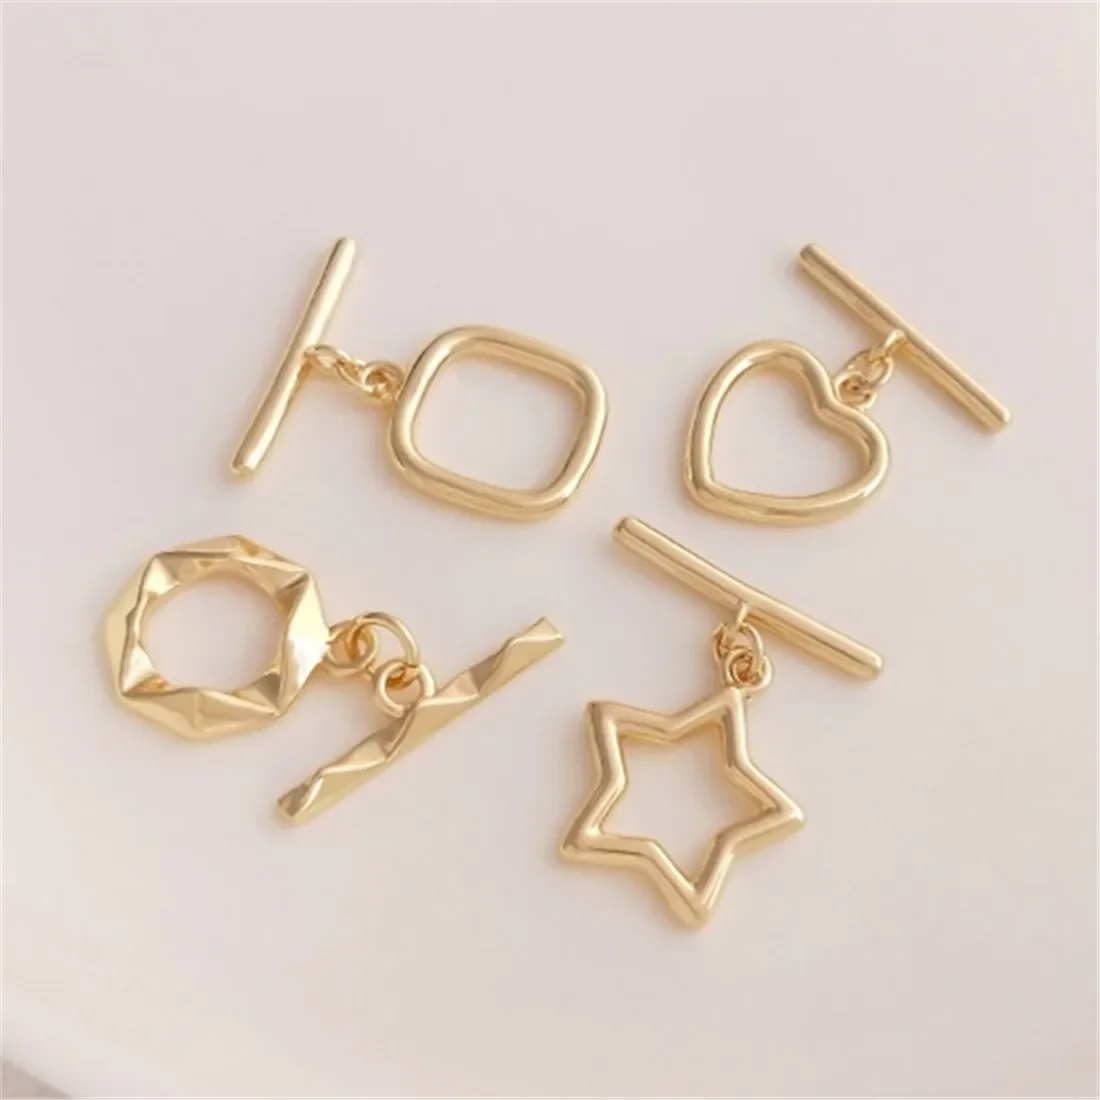 

OT Buckle 14K Gold-clad Love-shaped Five-pointed Star Rhombic Square Buckle Diy Finishing Connection Buckle Accessories B884